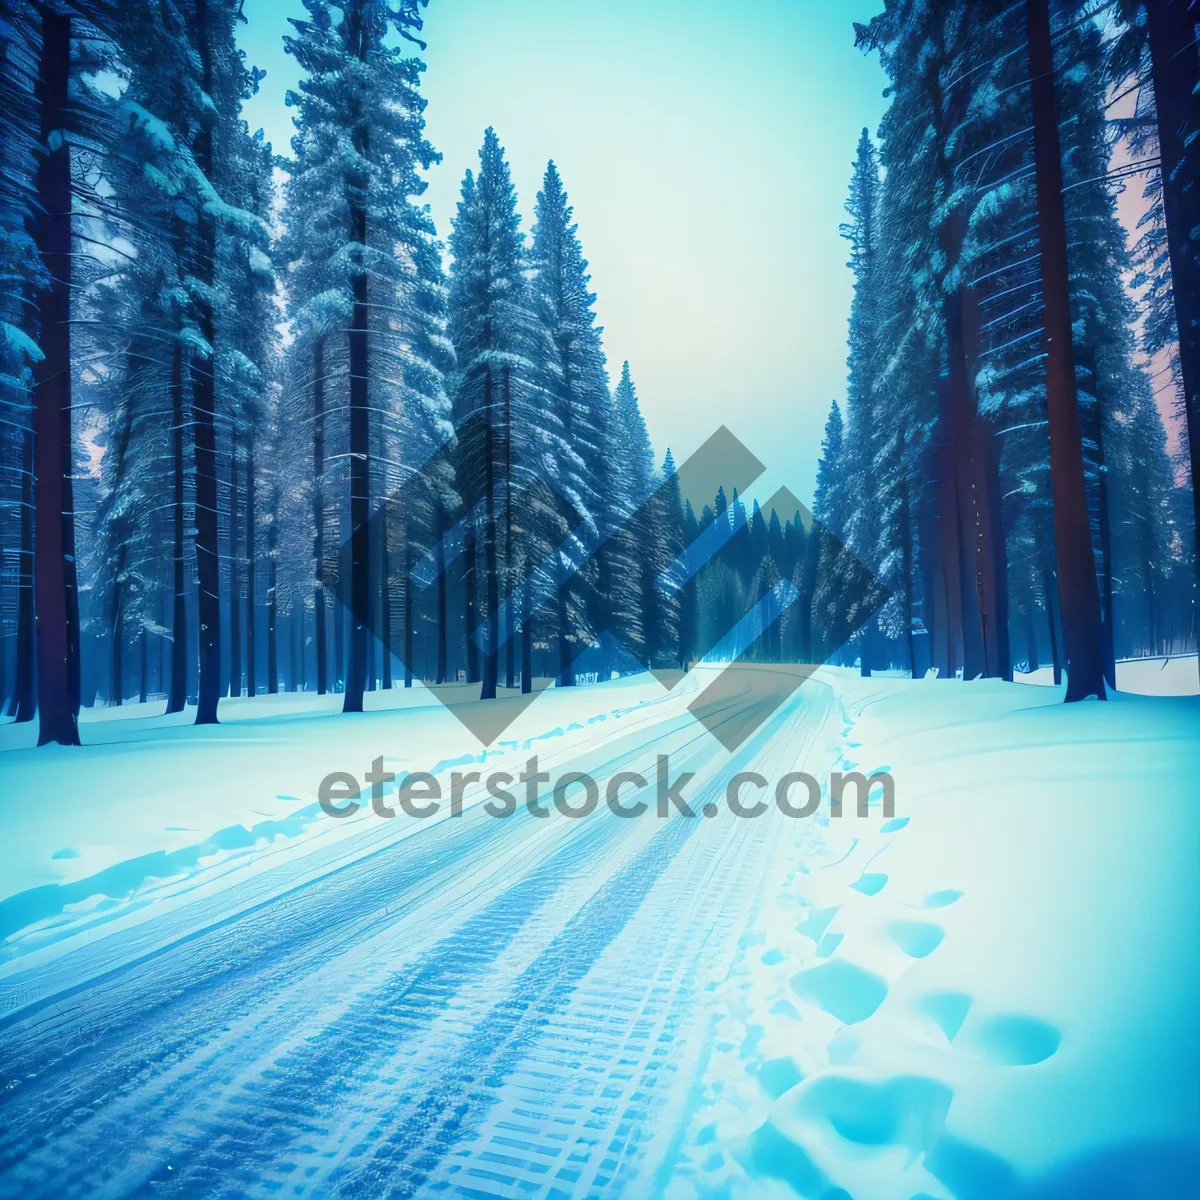 Picture of Winter Wonderland: Majestic Forest Blanketed in Snow